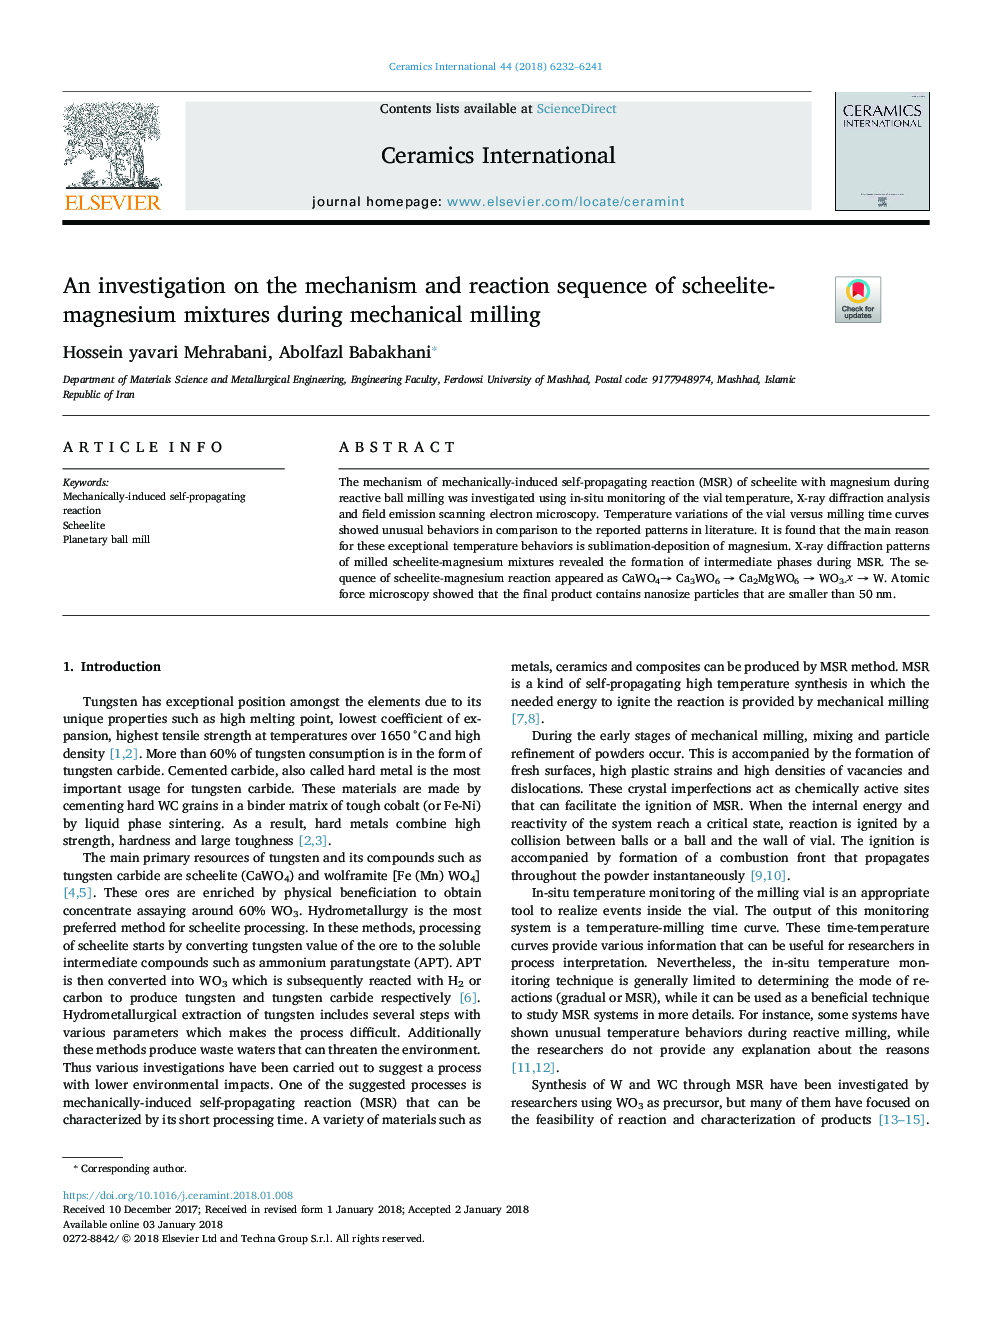 An investigation on the mechanism and reaction sequence of scheelite-magnesium mixtures during mechanical milling